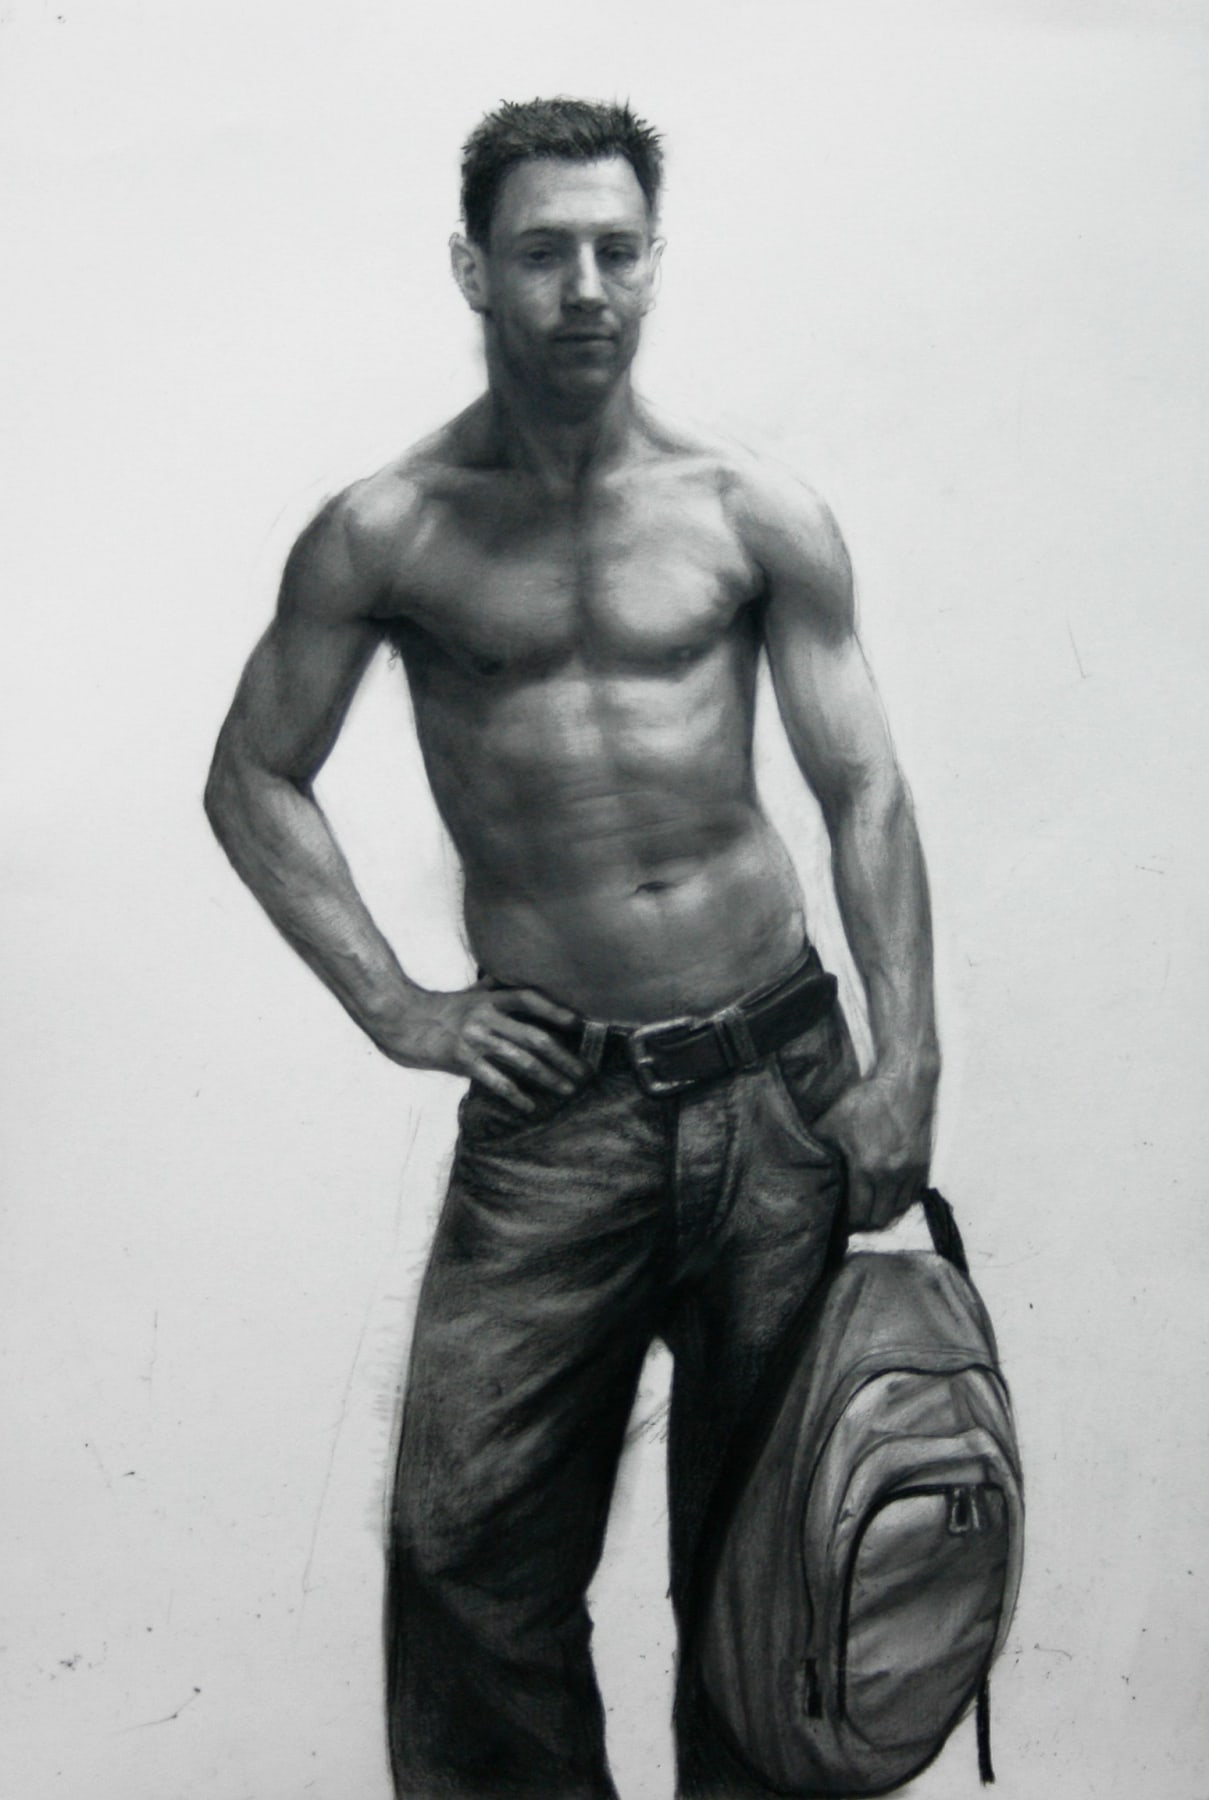 Steven Assael, Michael Holding a Backpack (SOLD), 2008, crayon and graphite on paper, 15 x 10 1/4 inches